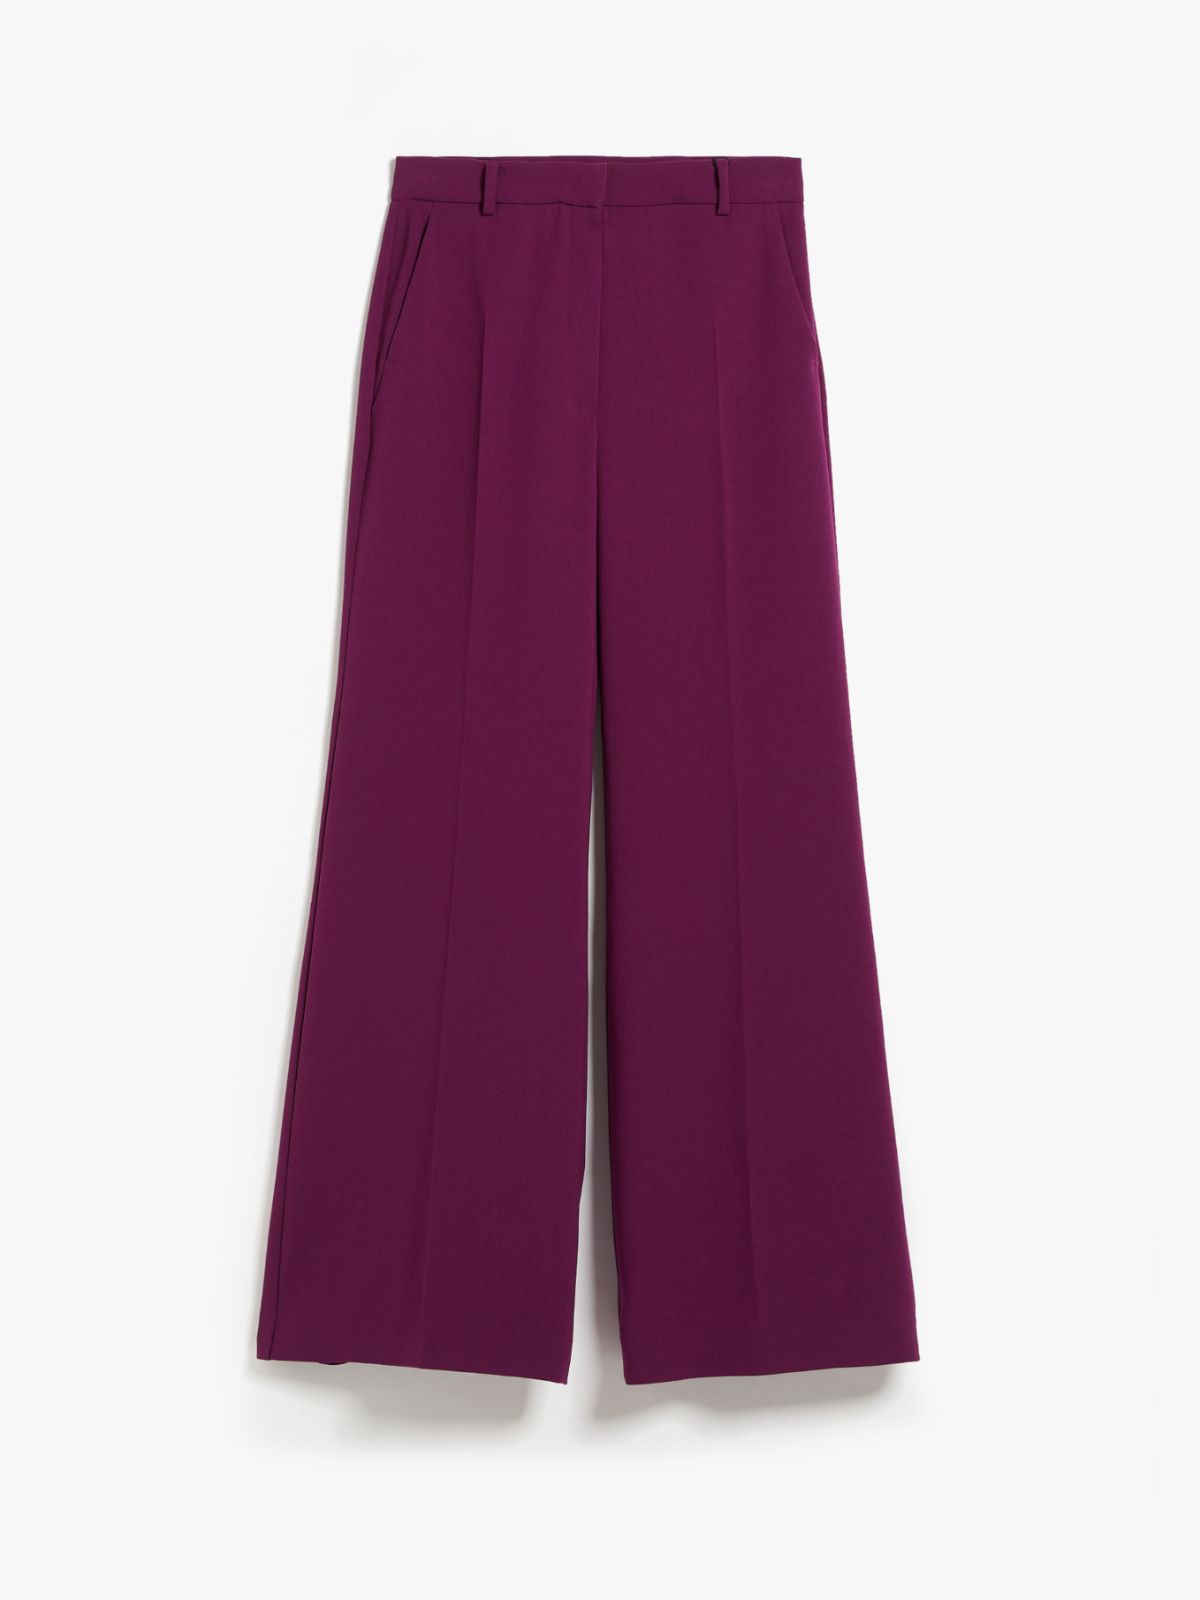 Bell bottom trousers in cady - BORDEAUX - Weekend Max Mara - 5